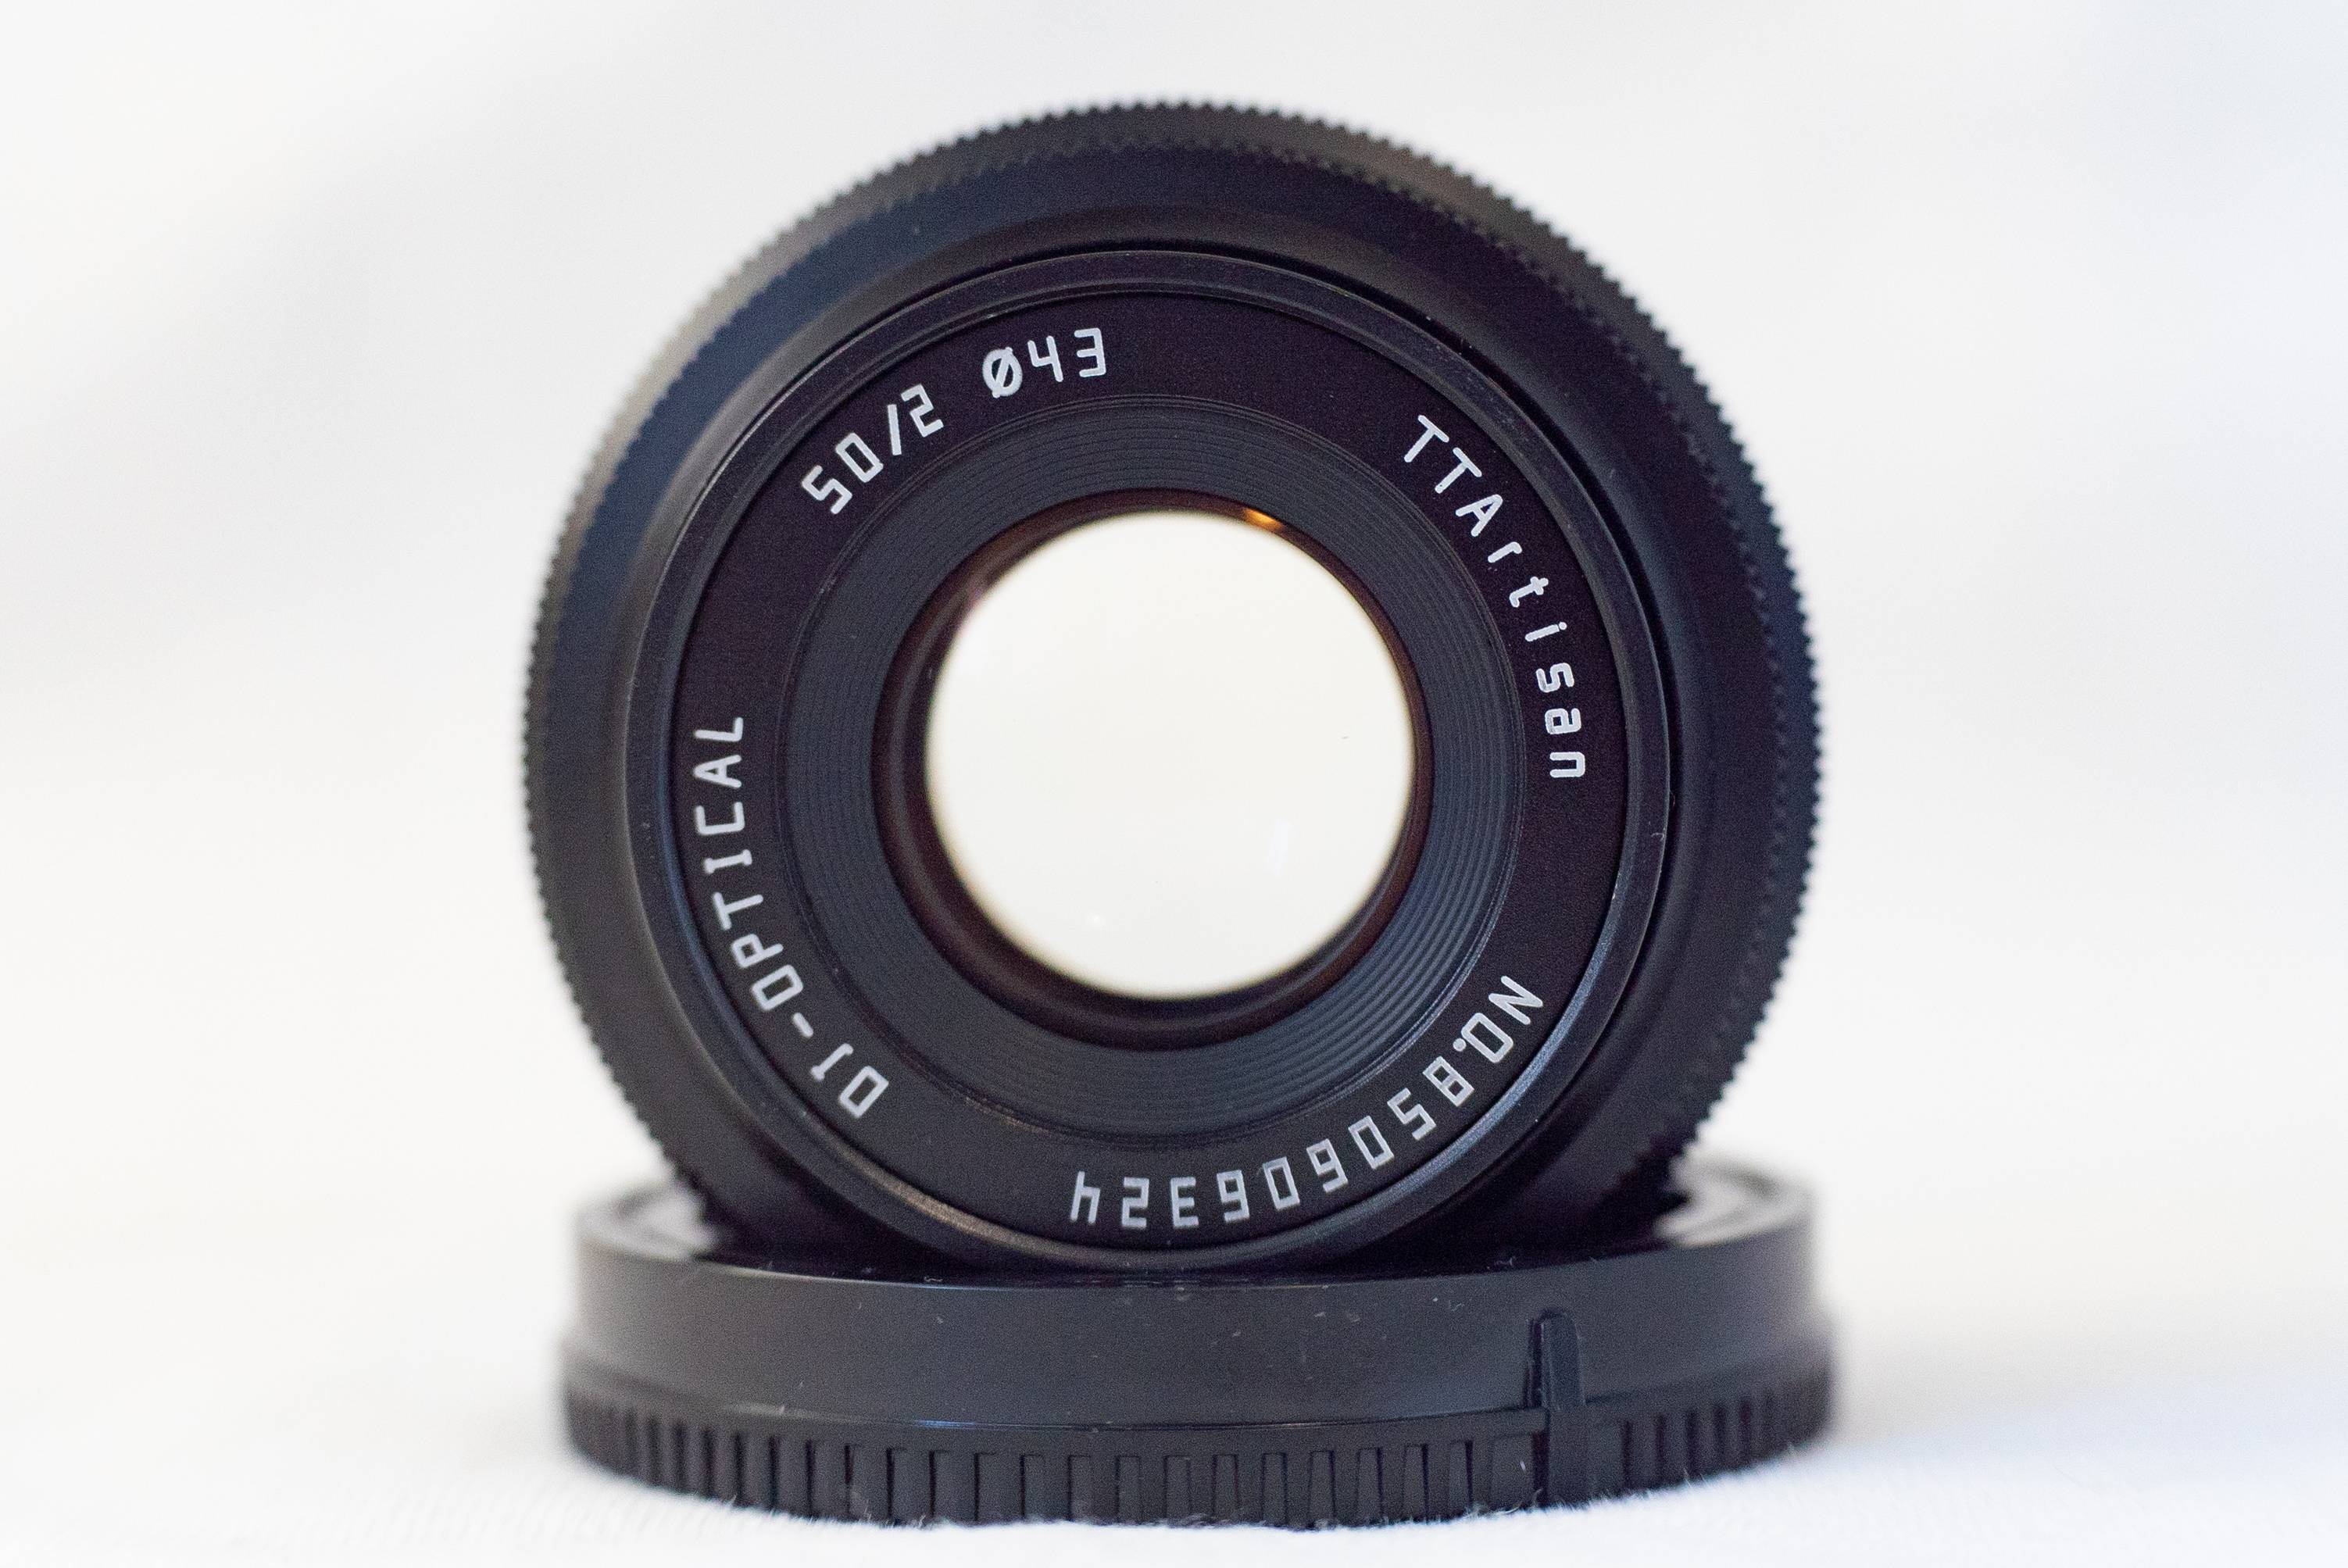 View of the entrance pupil of the lens with the aperture open.